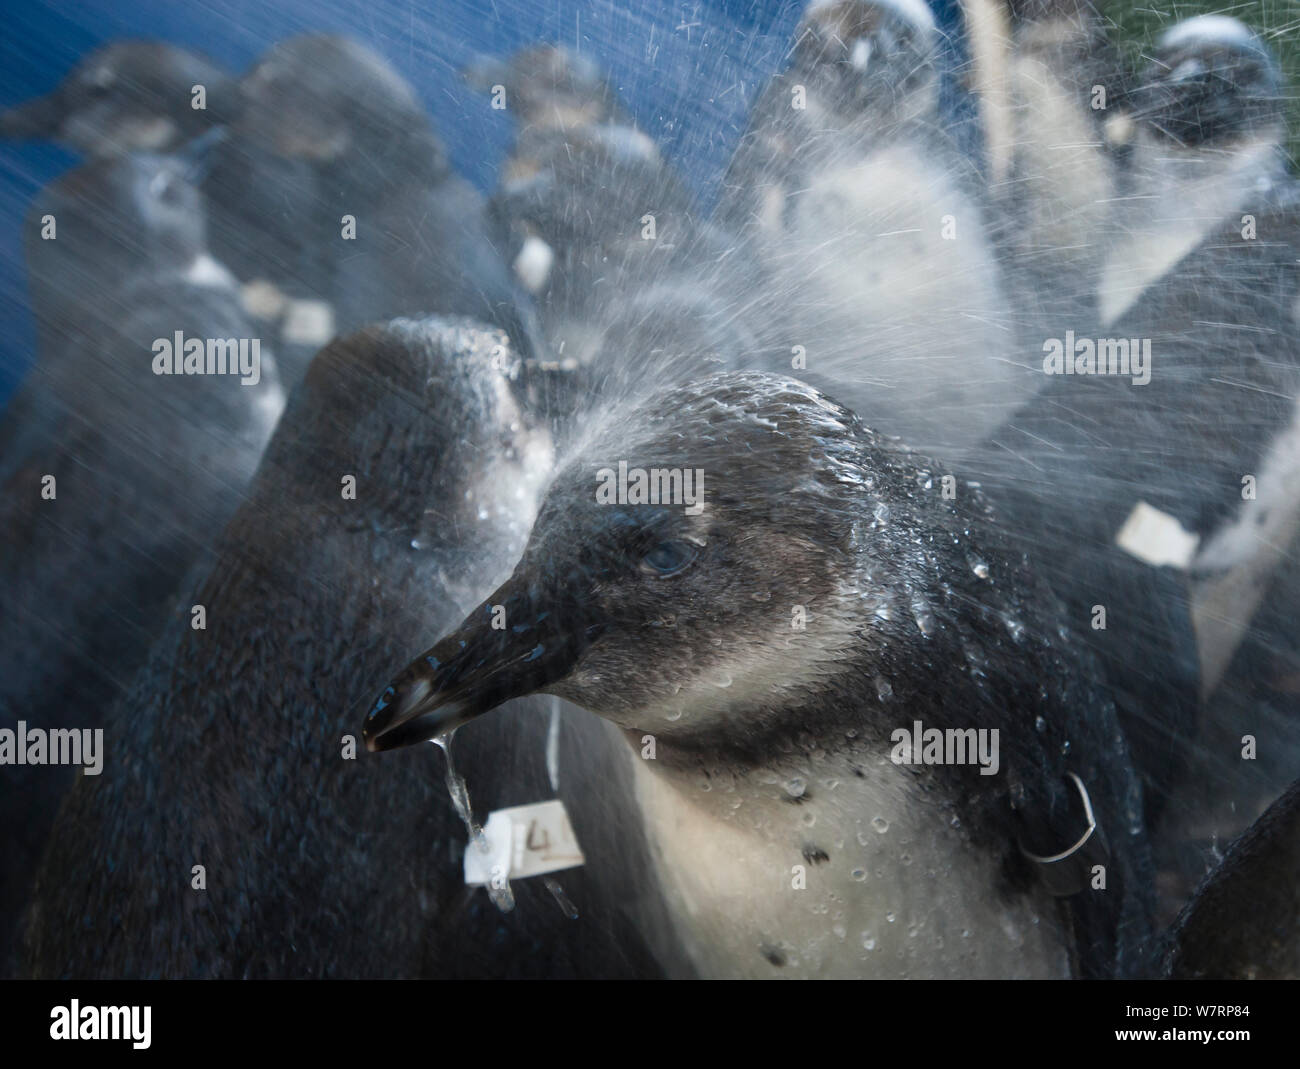 African penguins (Spheniscus demersus) sprayed with water after feeding, whilst in rehabilitation at Southern African Foundation for the Conservation of Coastal Birds (SANCCOB) Cape Town, South Africa. December 2011 Stock Photo